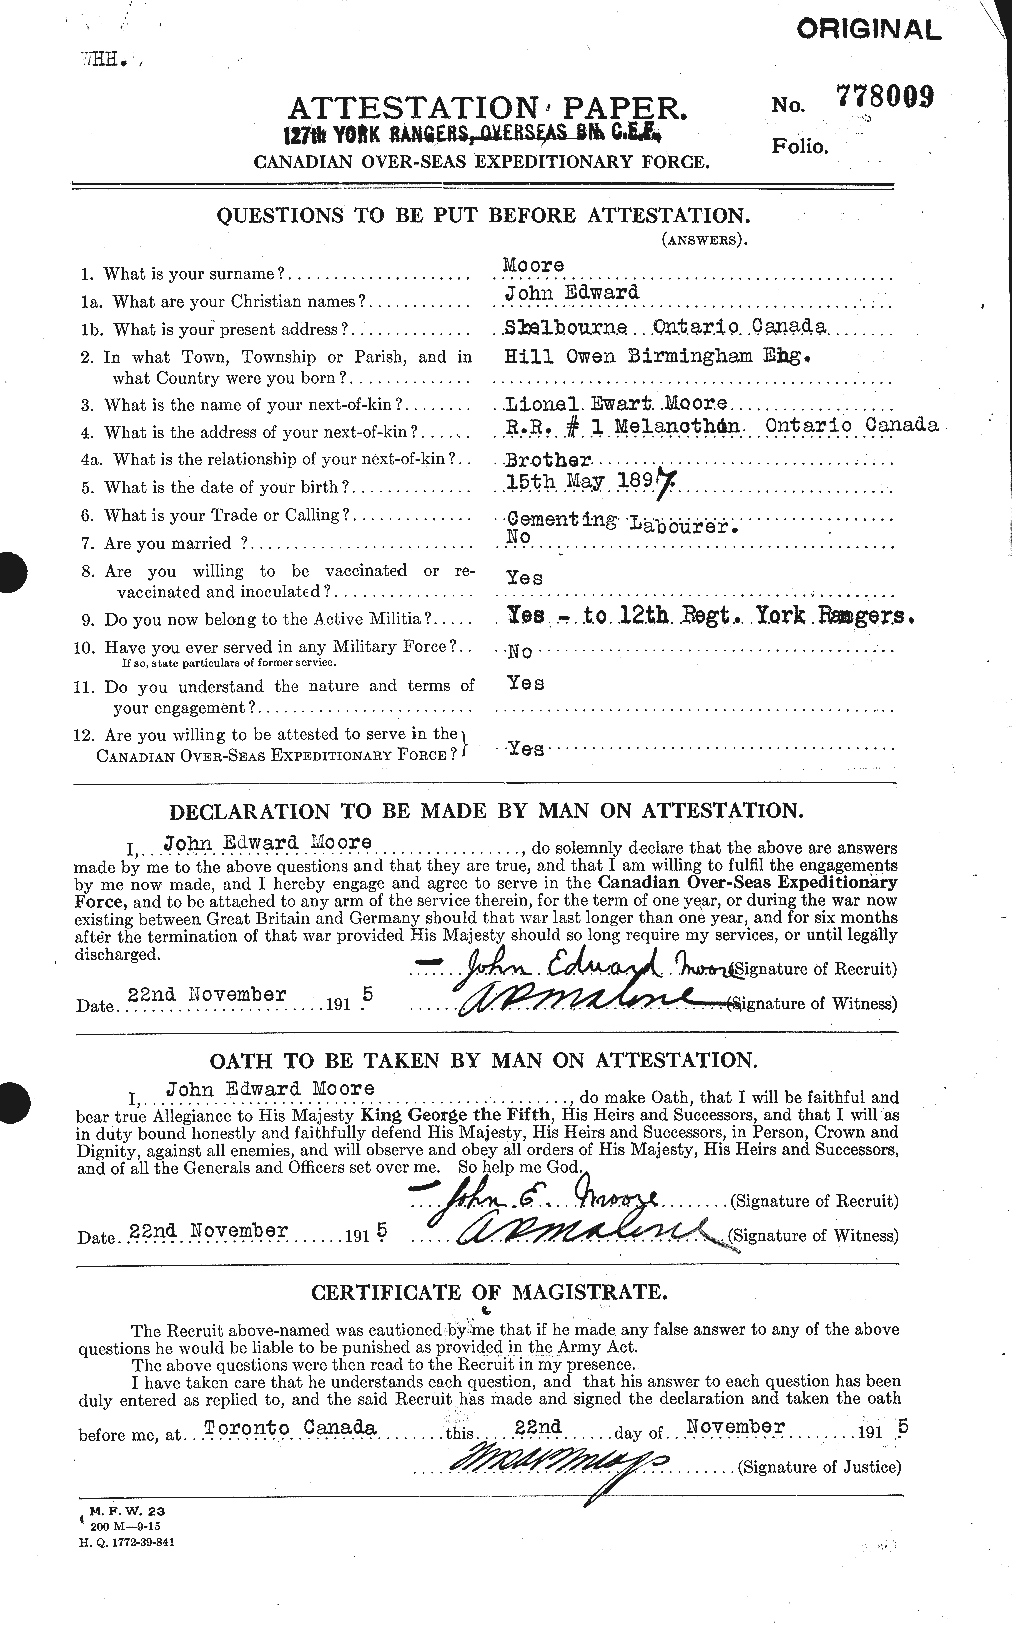 Personnel Records of the First World War - CEF 503282a